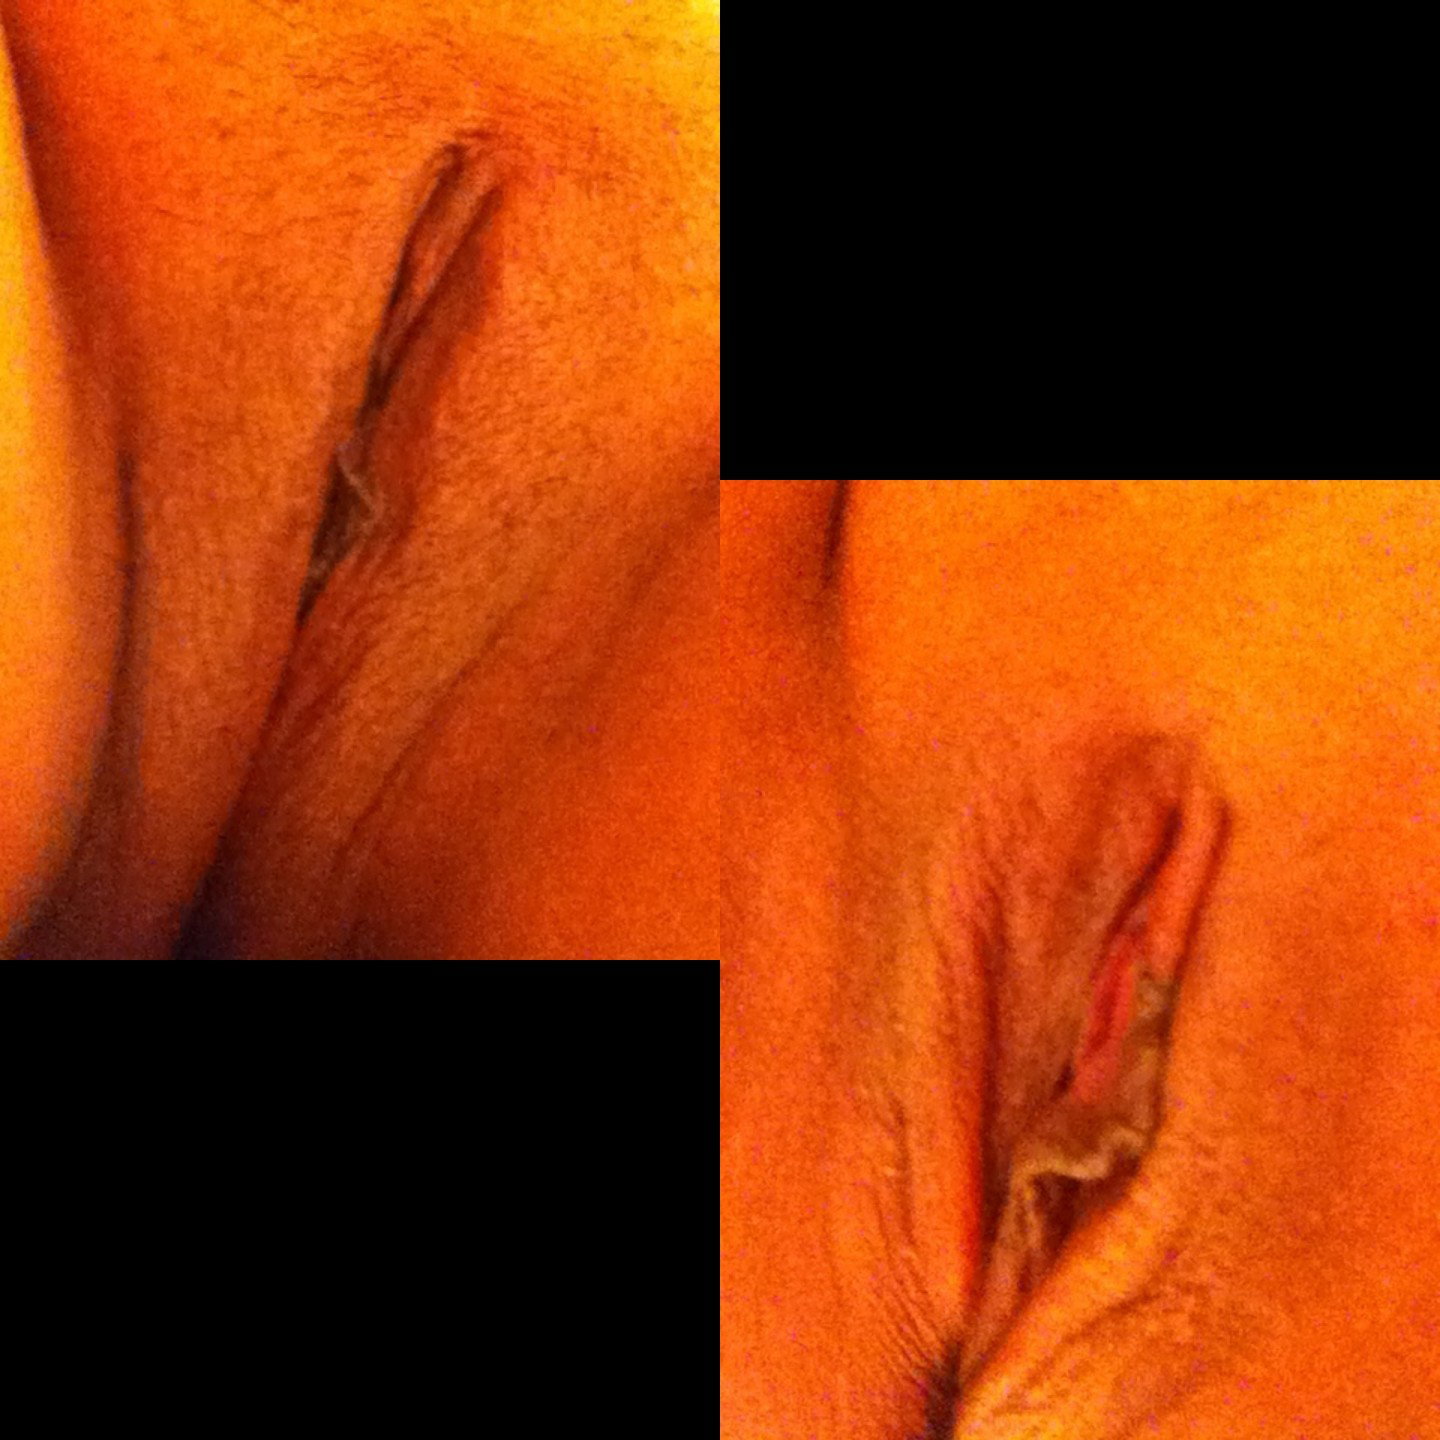 Watch the Photo by Cuck6969 with the username @Cuck6969, posted on June 5, 2019. The post is about the topic Before & After. and the text says 'My wife sent me these the night after cheating with her long term boyfriend. He pounded her so hard she could barely walk the next day'